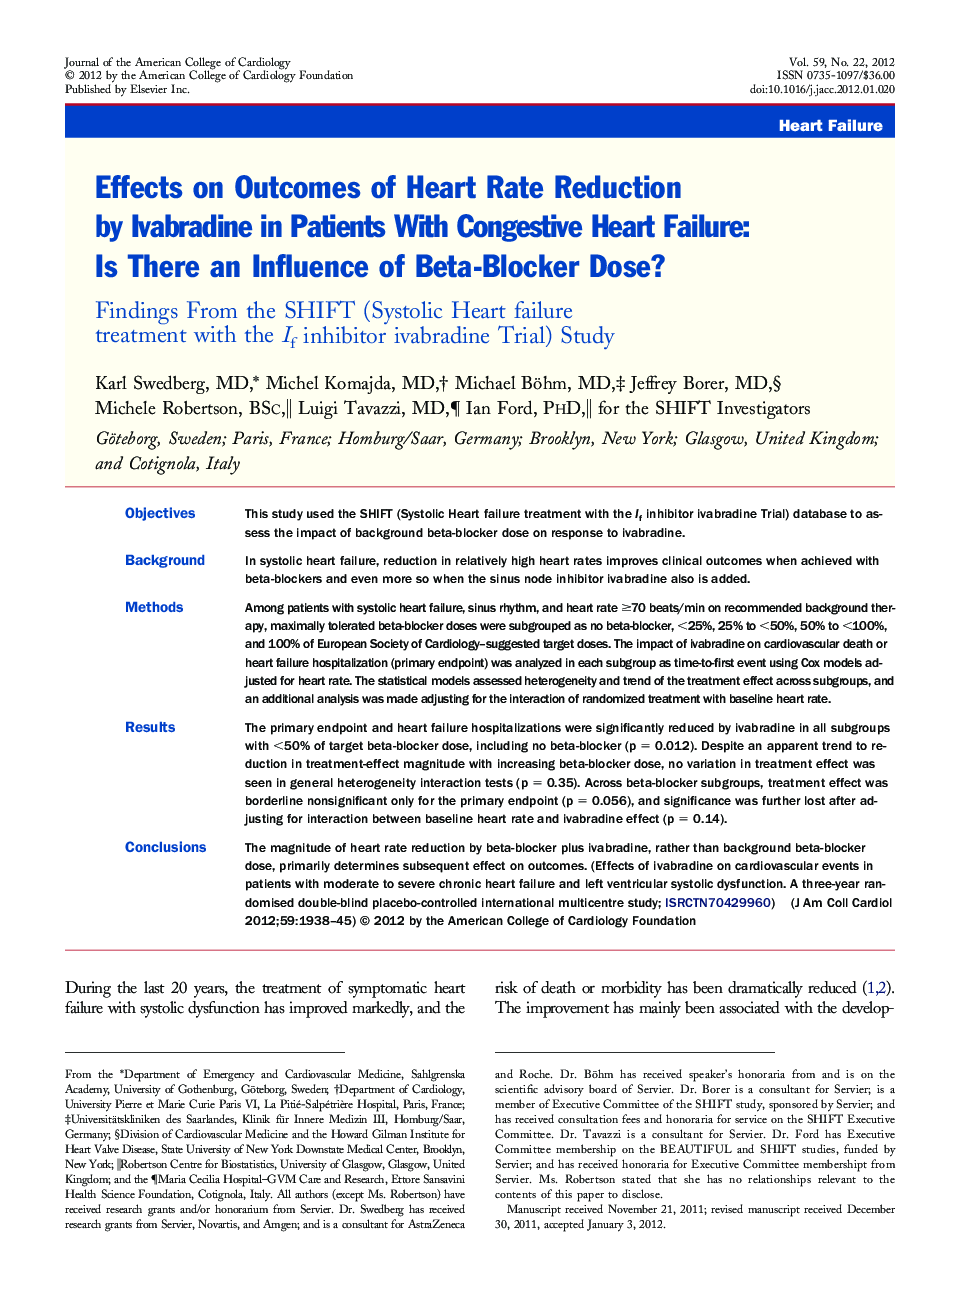 Effects on Outcomes of Heart Rate Reduction by Ivabradine in Patients With Congestive Heart Failure: Is There an Influence of Beta-Blocker Dose? : Findings From the SHIFT (Systolic Heart failure treatment with the If inhibitor ivabradine Trial) Study